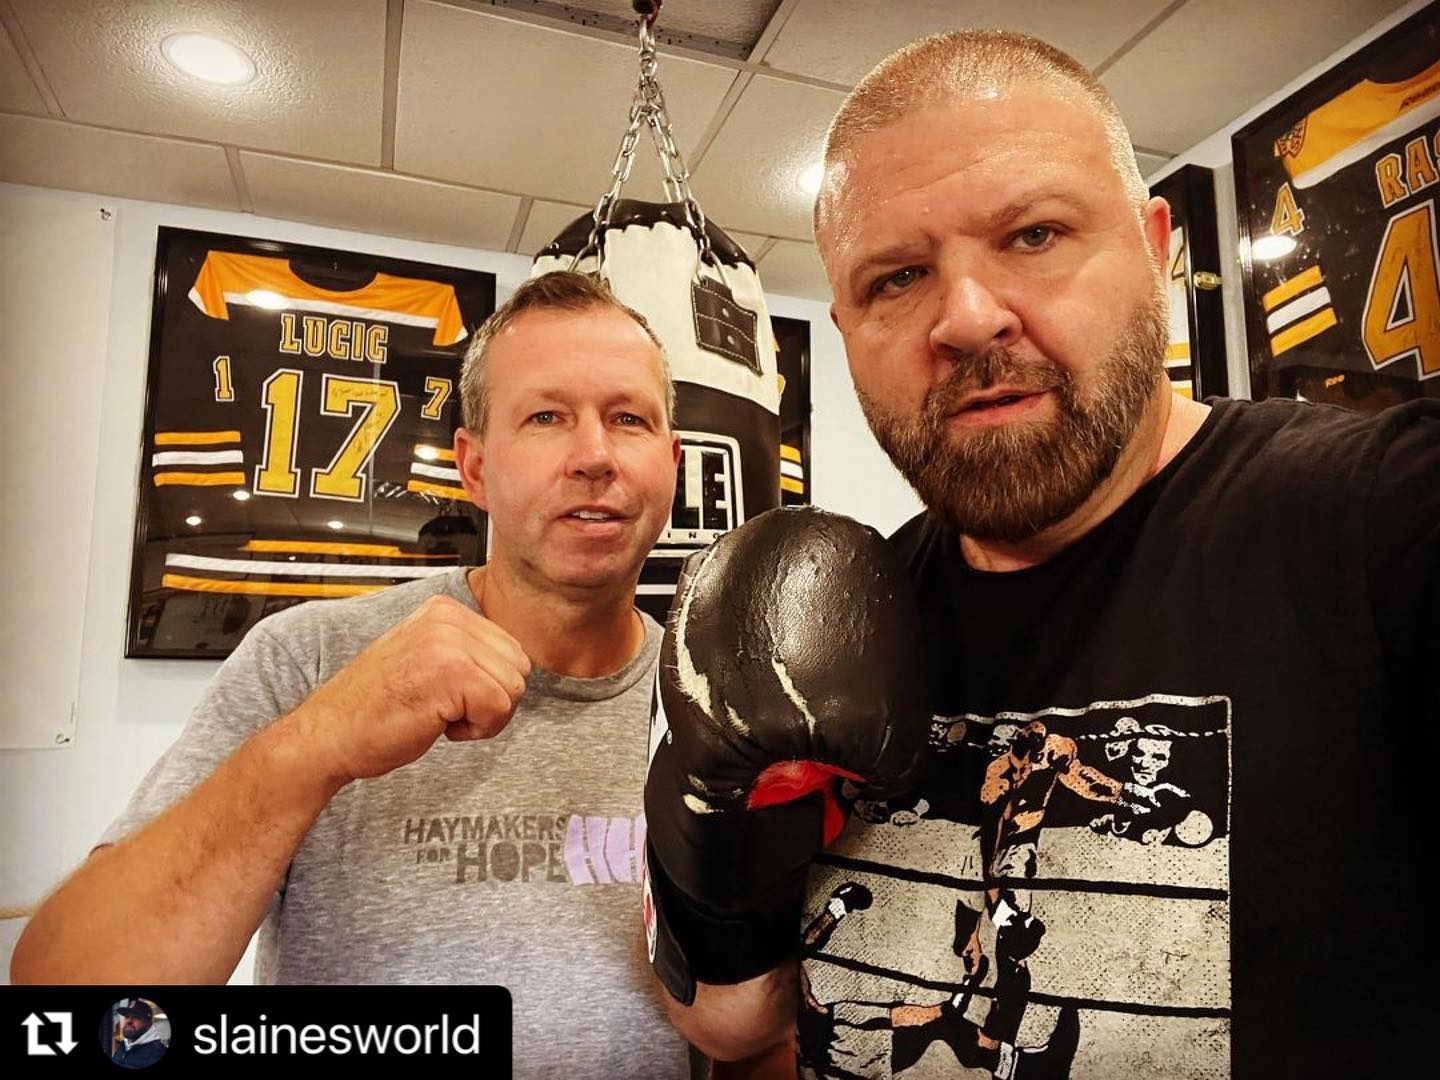 @slainesworld ・・・
Morning meditation with my man Tommy Mac. 

Stress, pressure and fear can start barking. What are you doing today that helps you keep the hounds at bay?